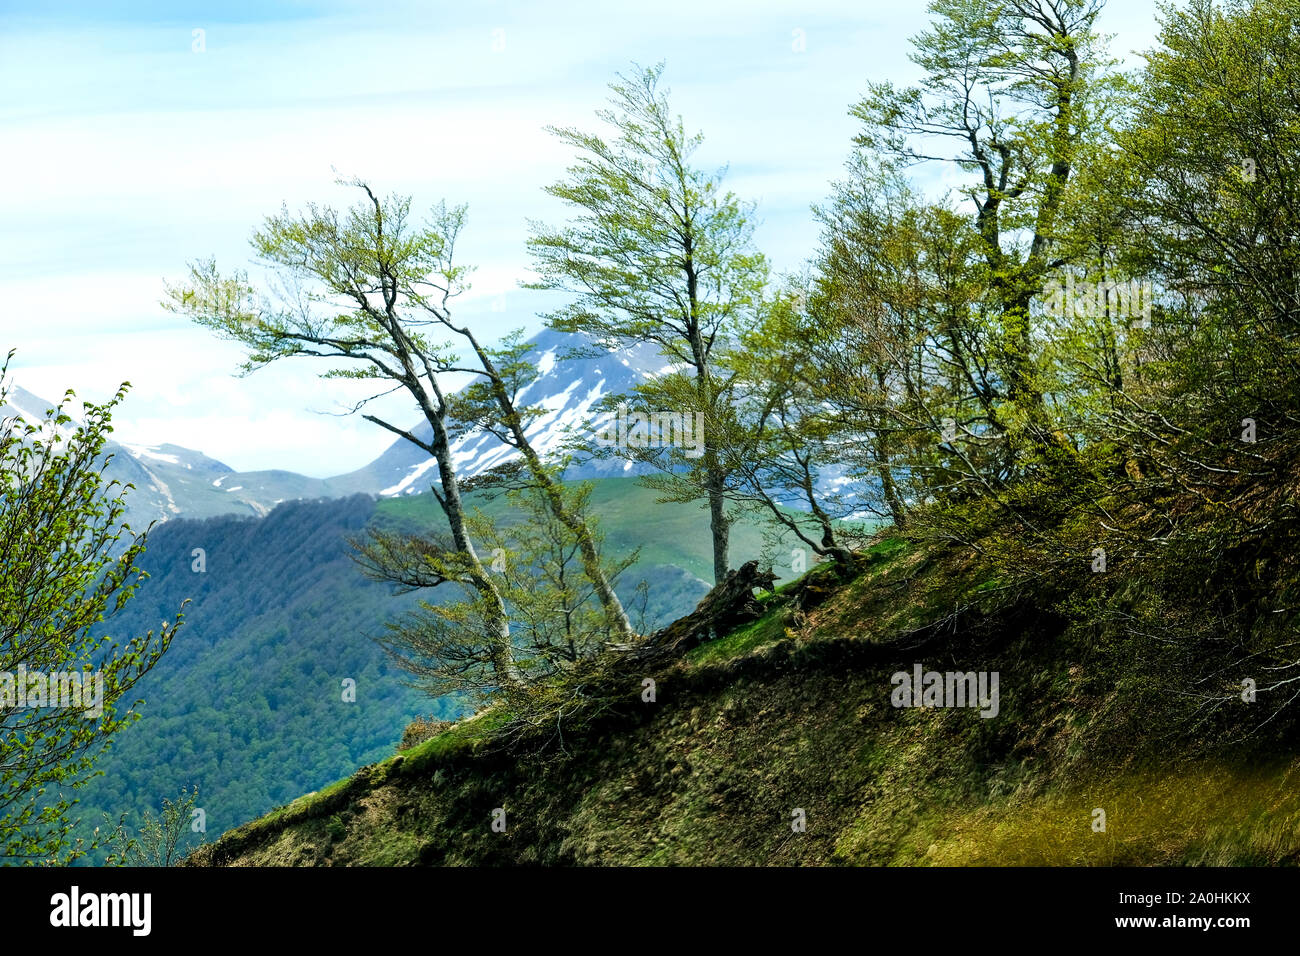 a landscape view of the Pyrenees in southern France, trees, mountains etc Stock Photo